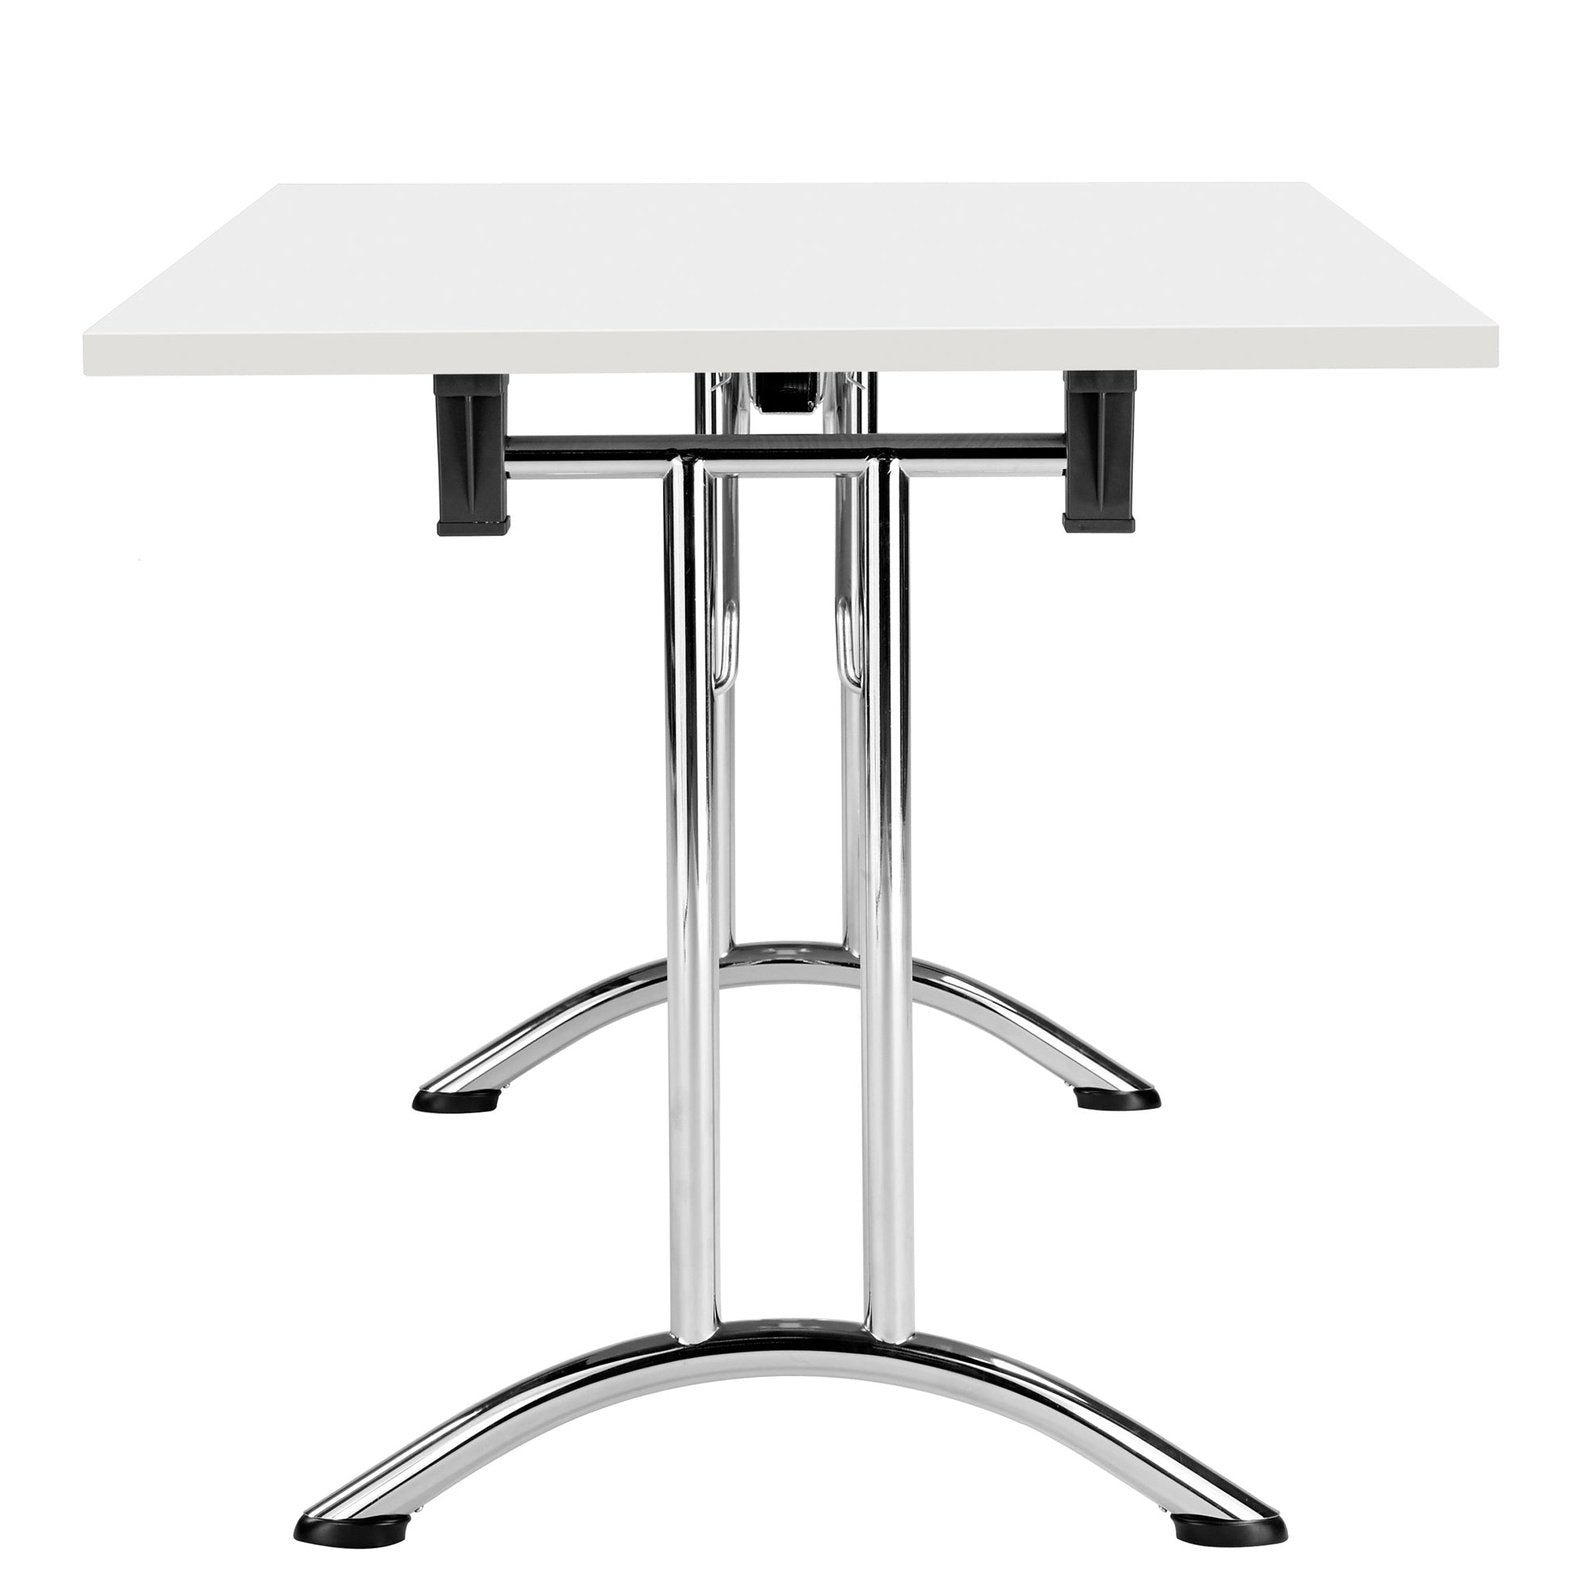 One Union Straight 1200mm Folding Table